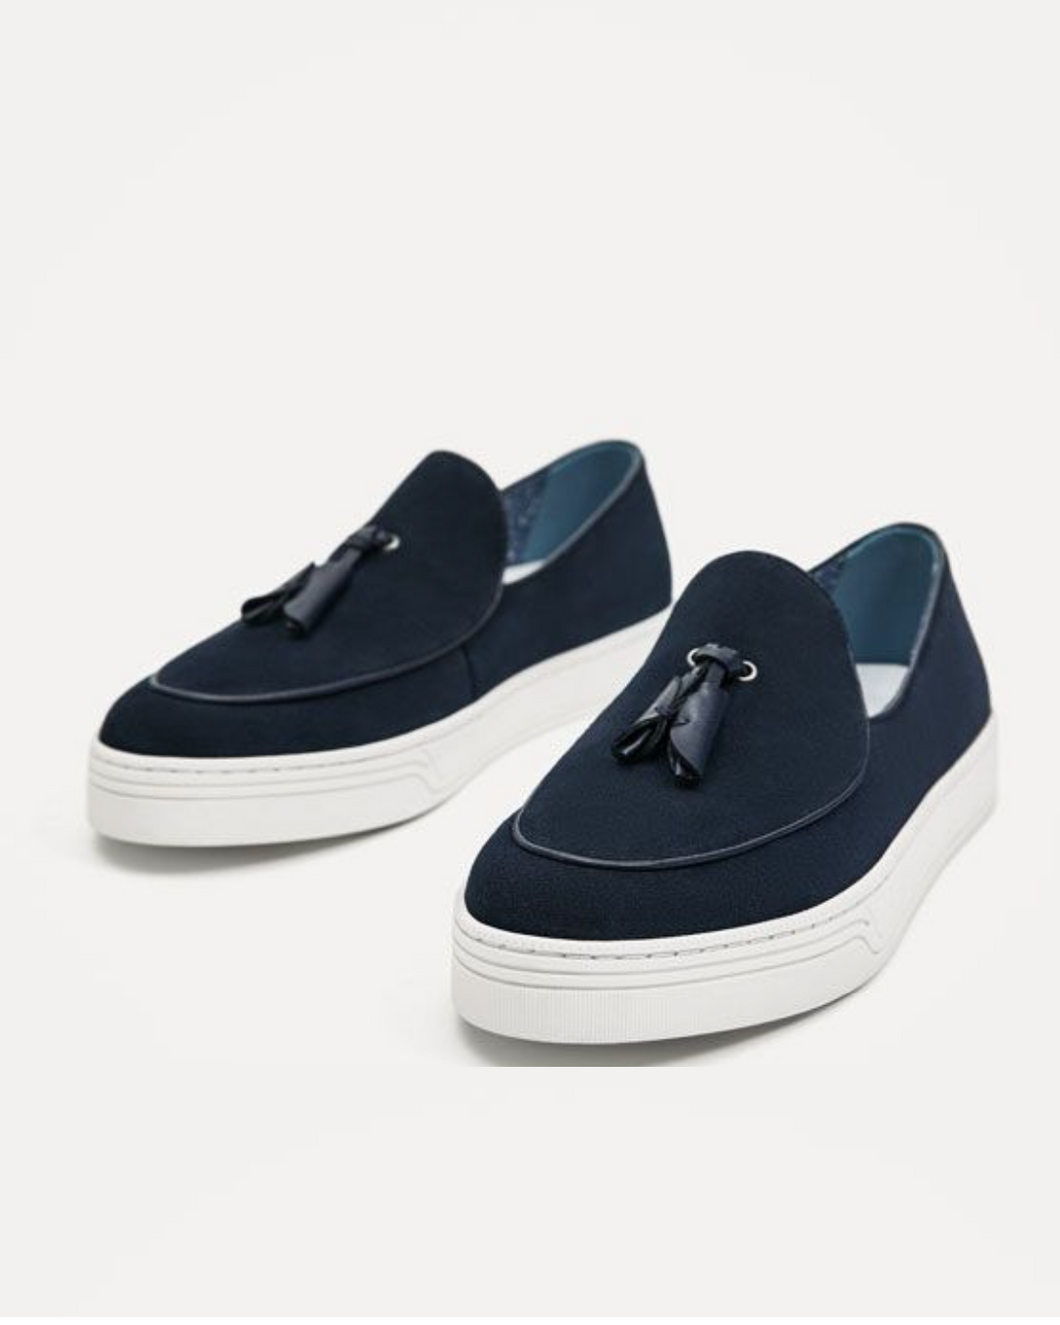 Blue Suede Governors Belgian Plimsoles Sneakers with Tassel Detail